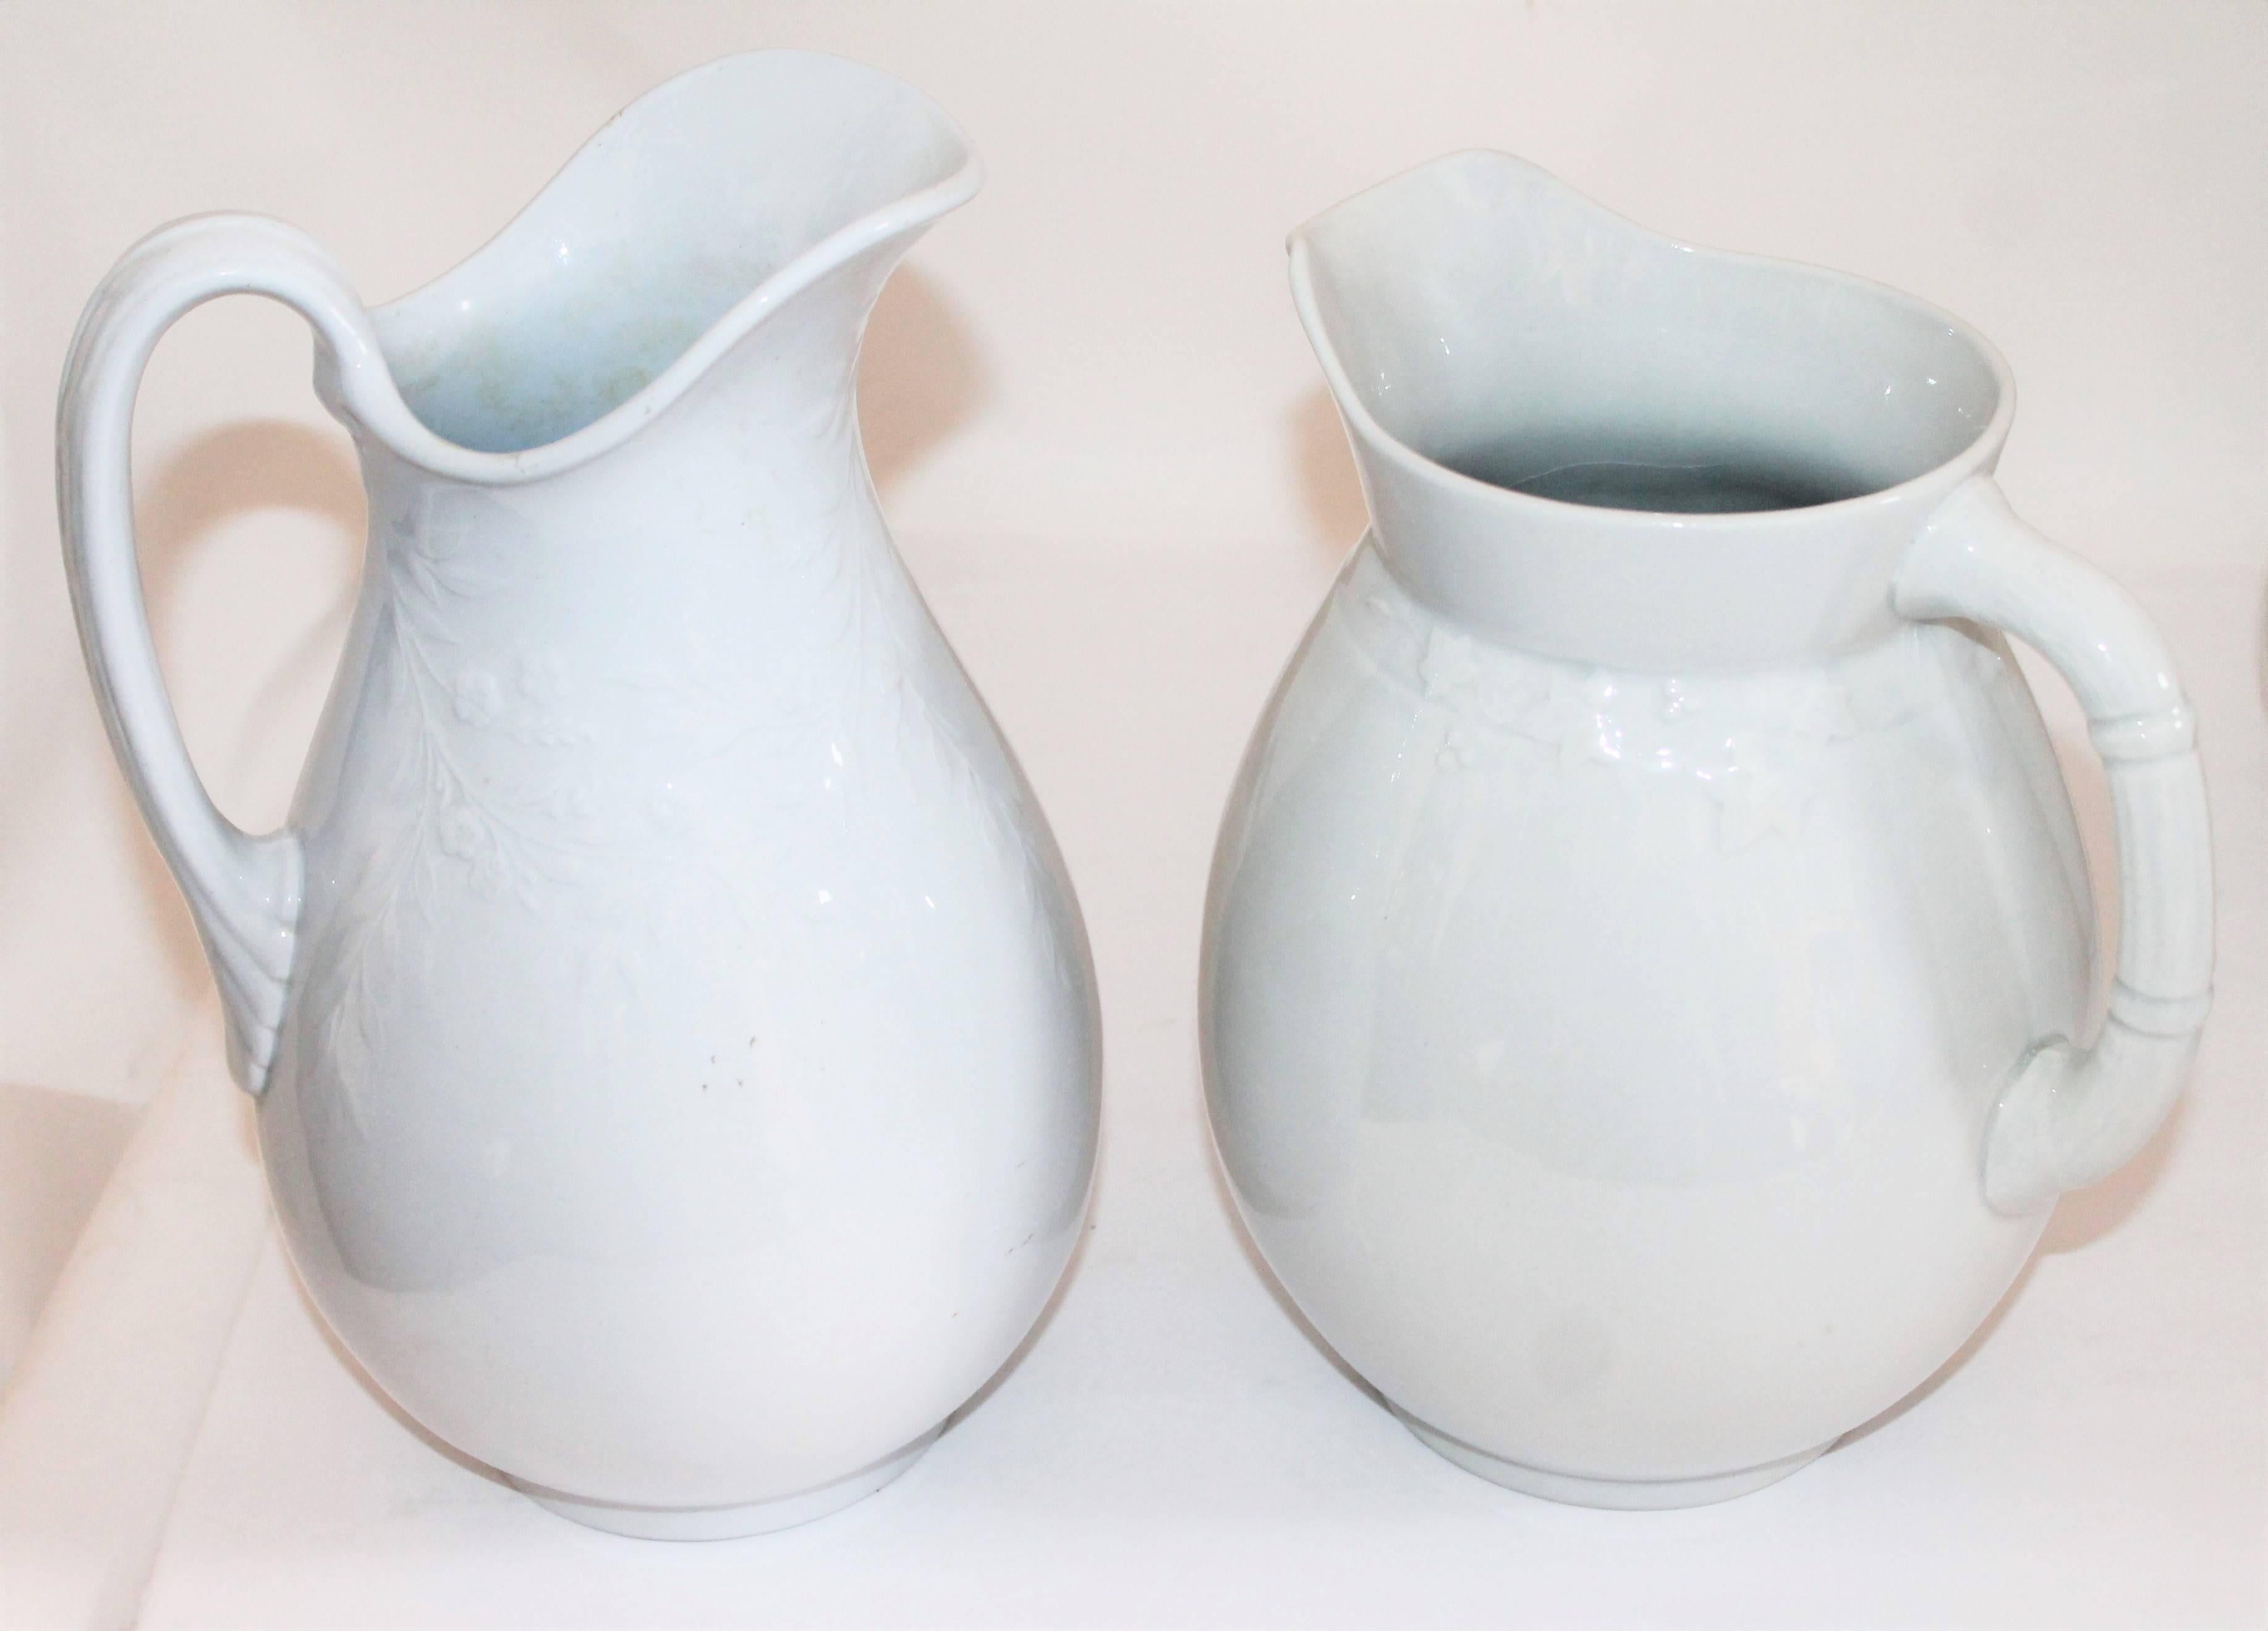 Molded Collection of Four 19th Century Iron Stone Pitchers